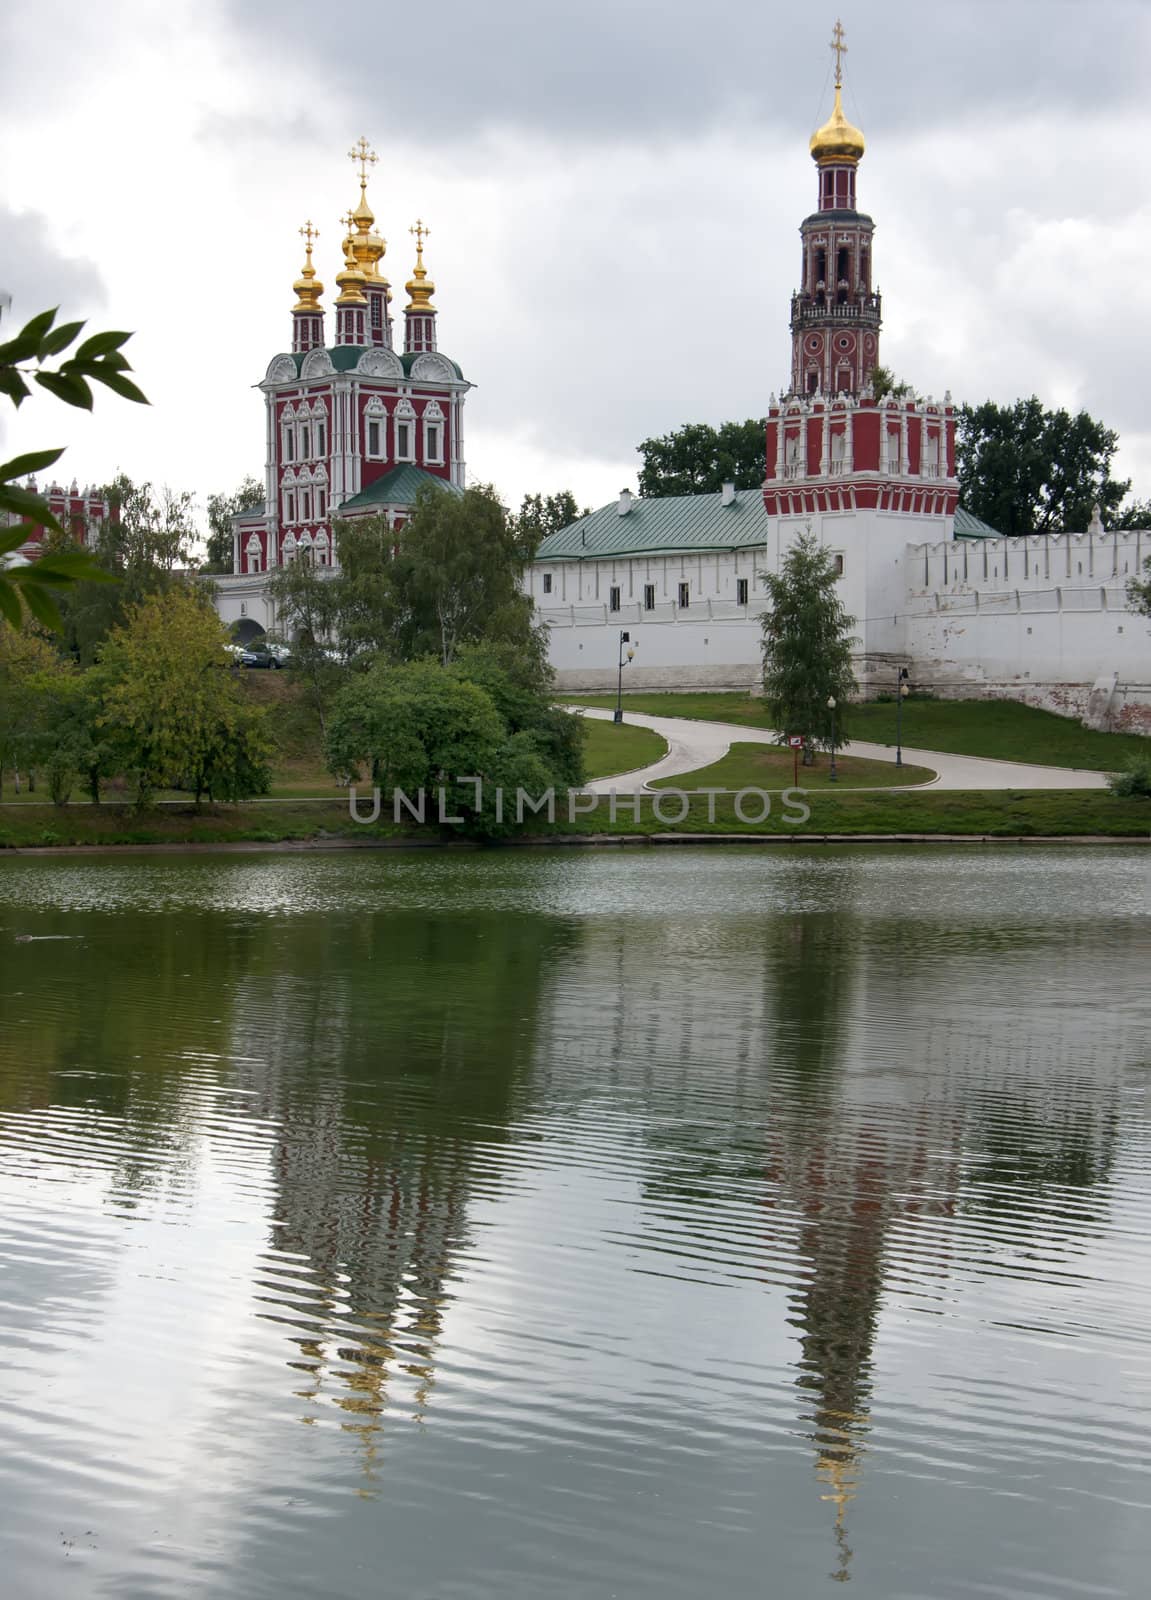 Novodevichy Convent reflects in the lake - portrait style. by Claudine